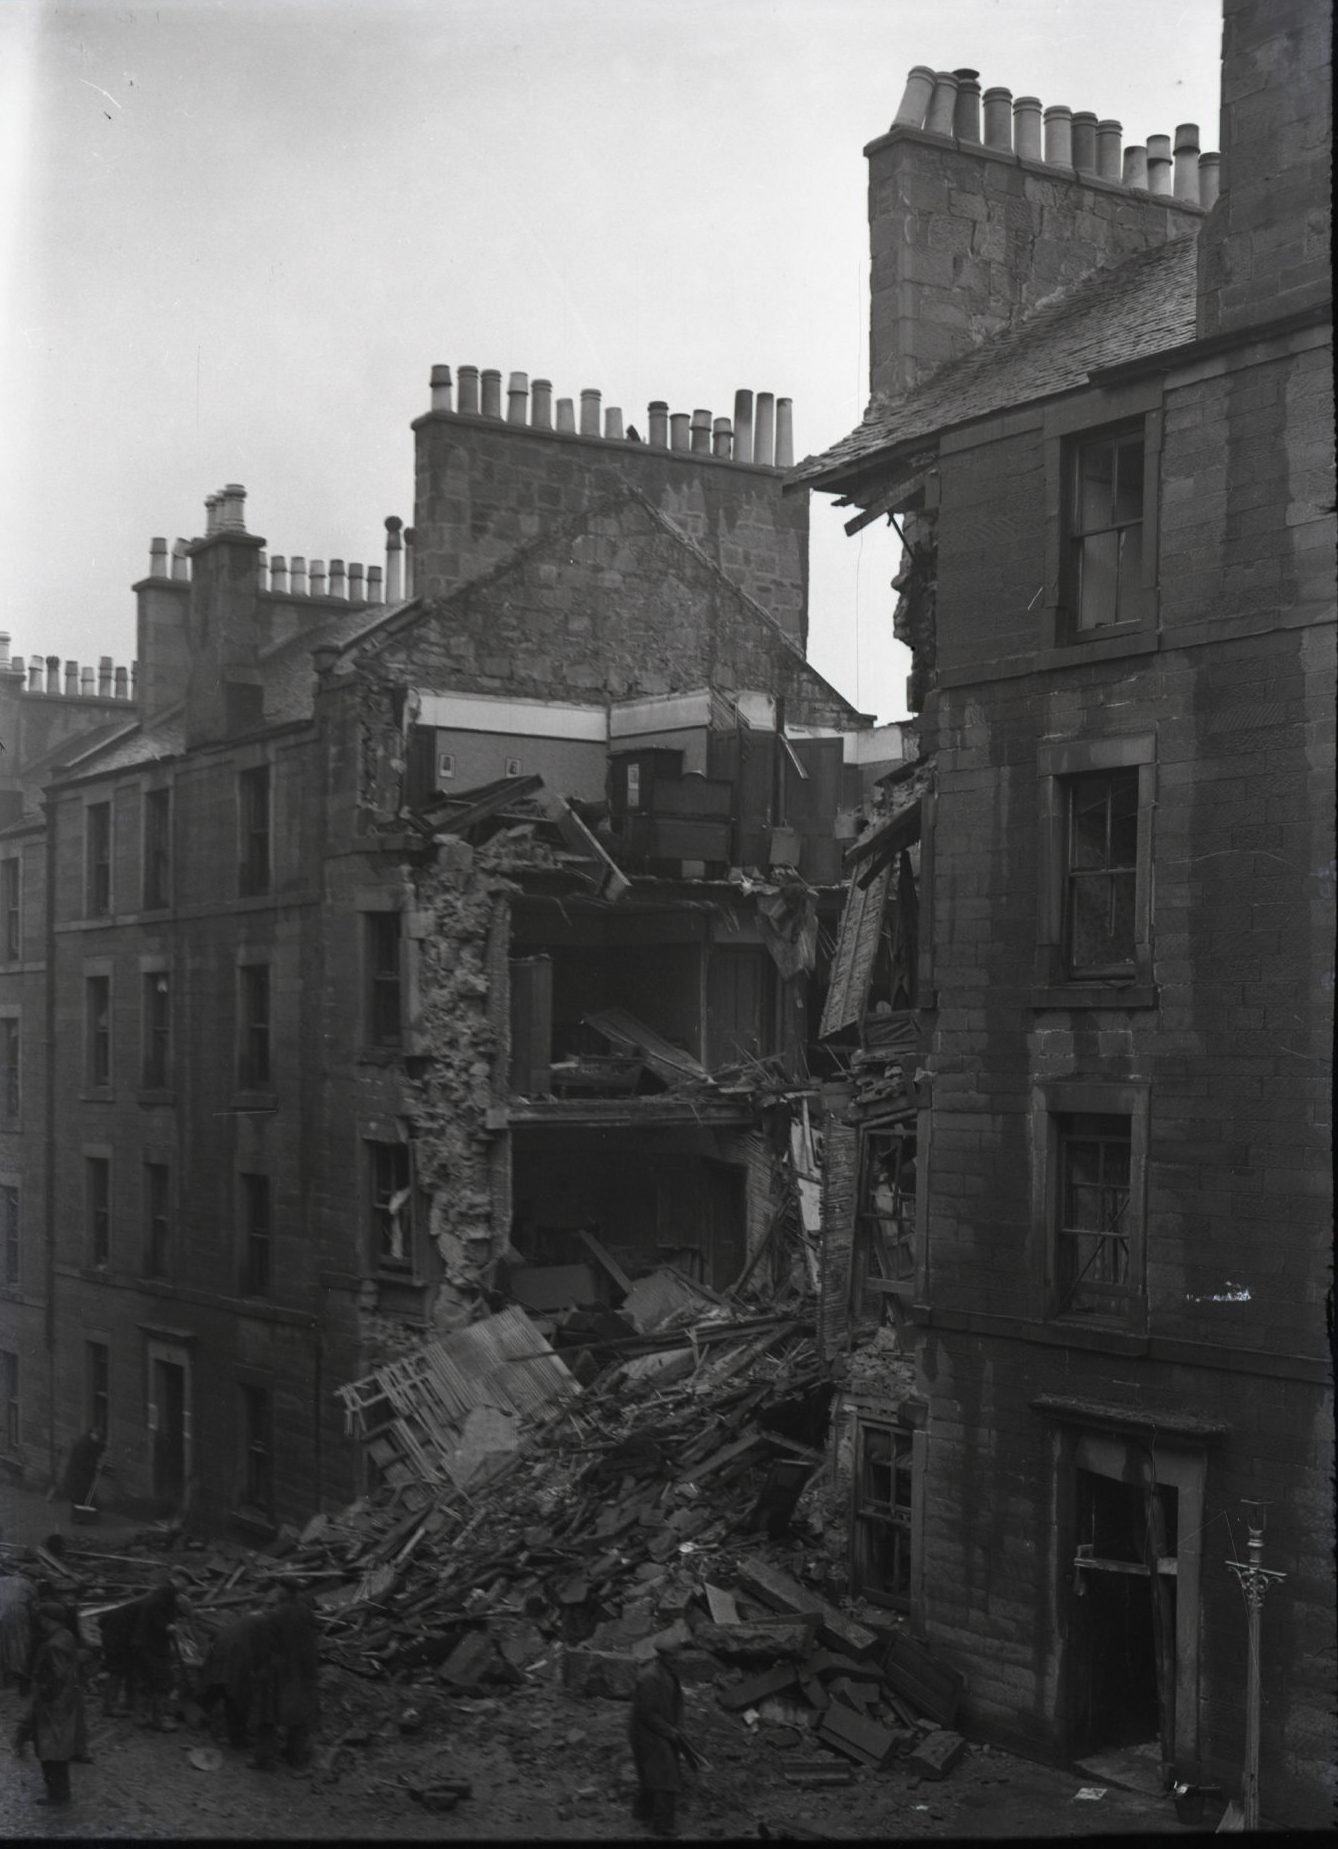 The obliterated building in Dundee leaves a gap in the row of tenements, with rubble and debris everywhere